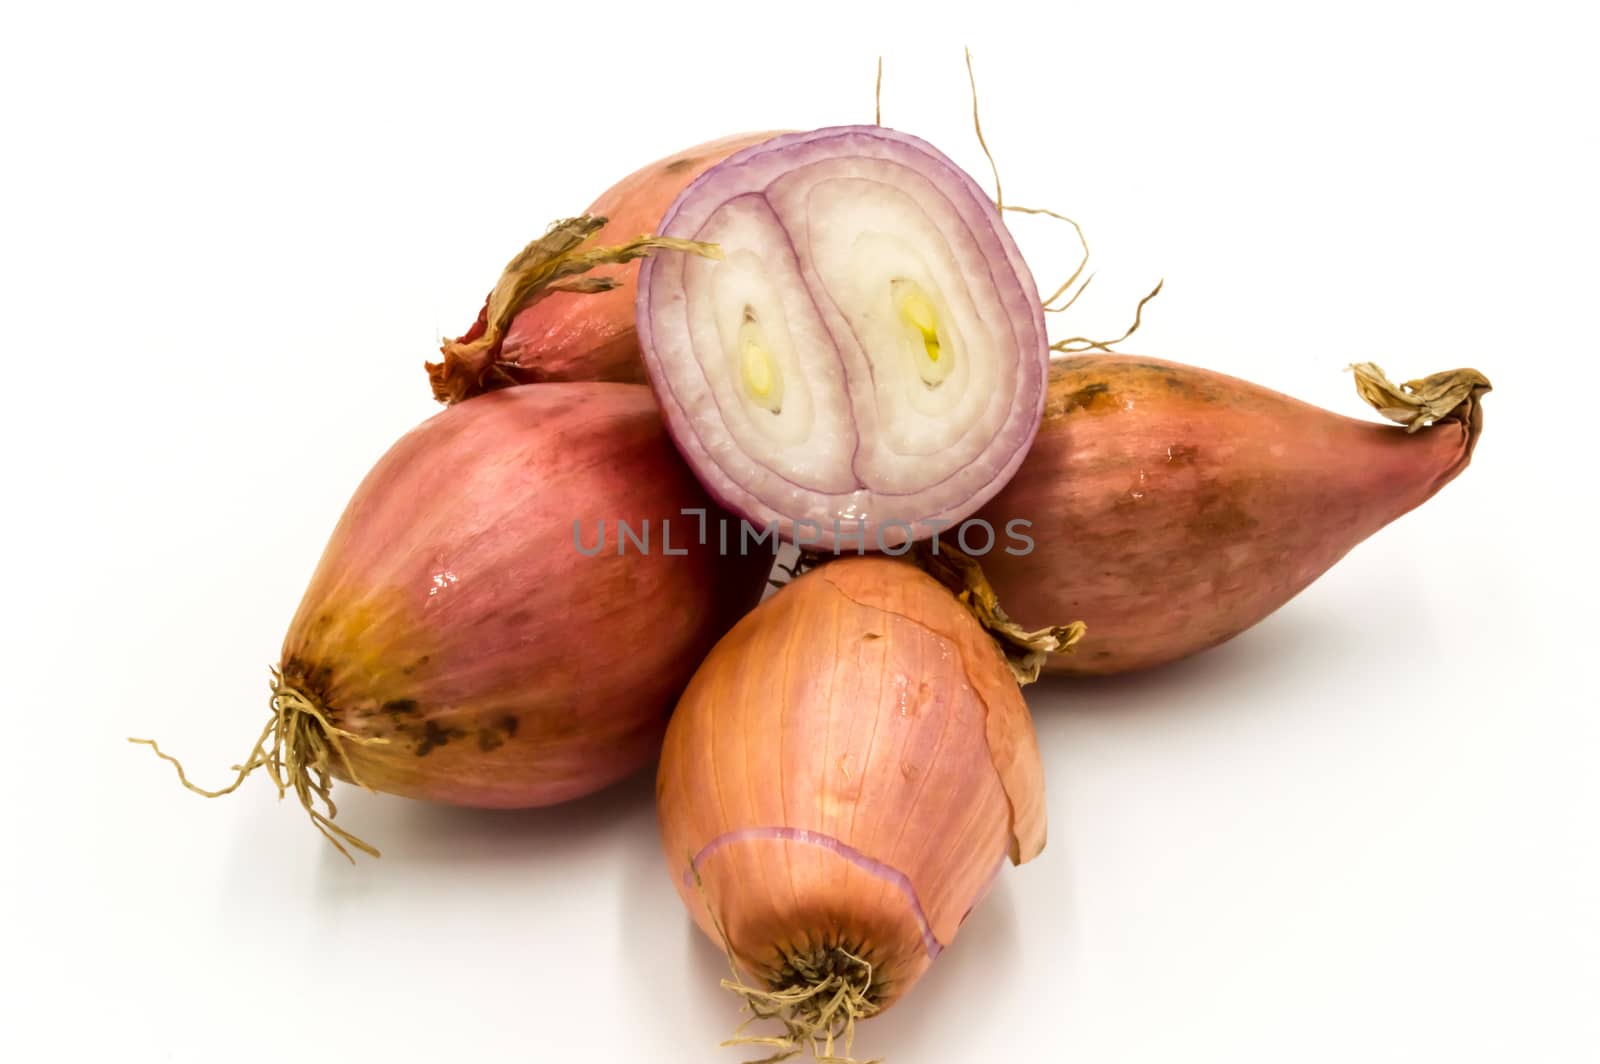 Vegetables: several isolated shallots, one cut in half  by Philou1000